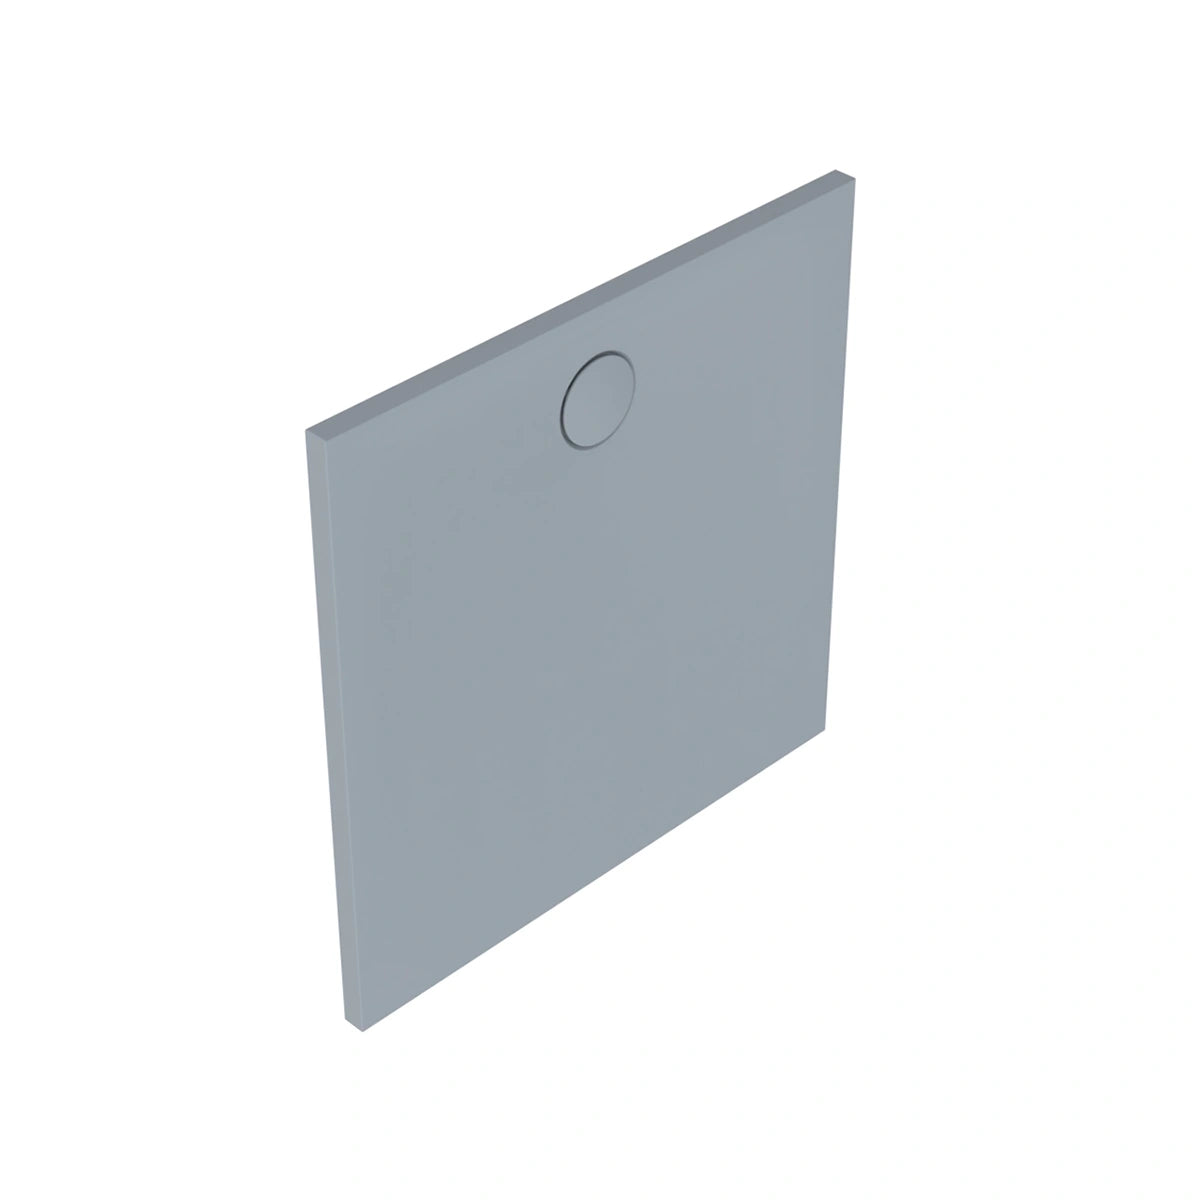 Shower base - 35.43 in.  x 35.43 in. - gray structure